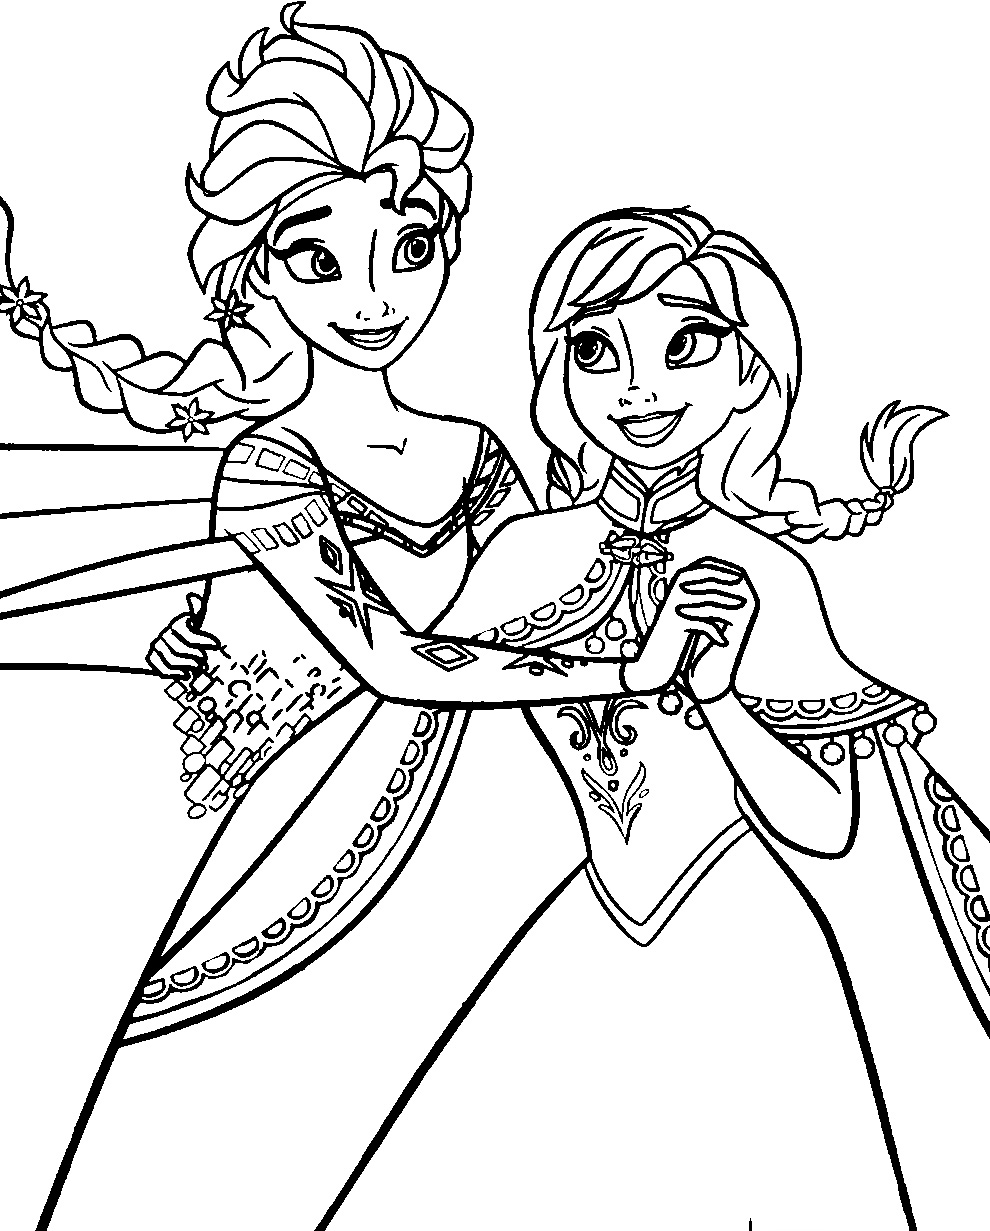 pictures of frozen to color downloads frozen coloring pages images pictures to color frozen of 